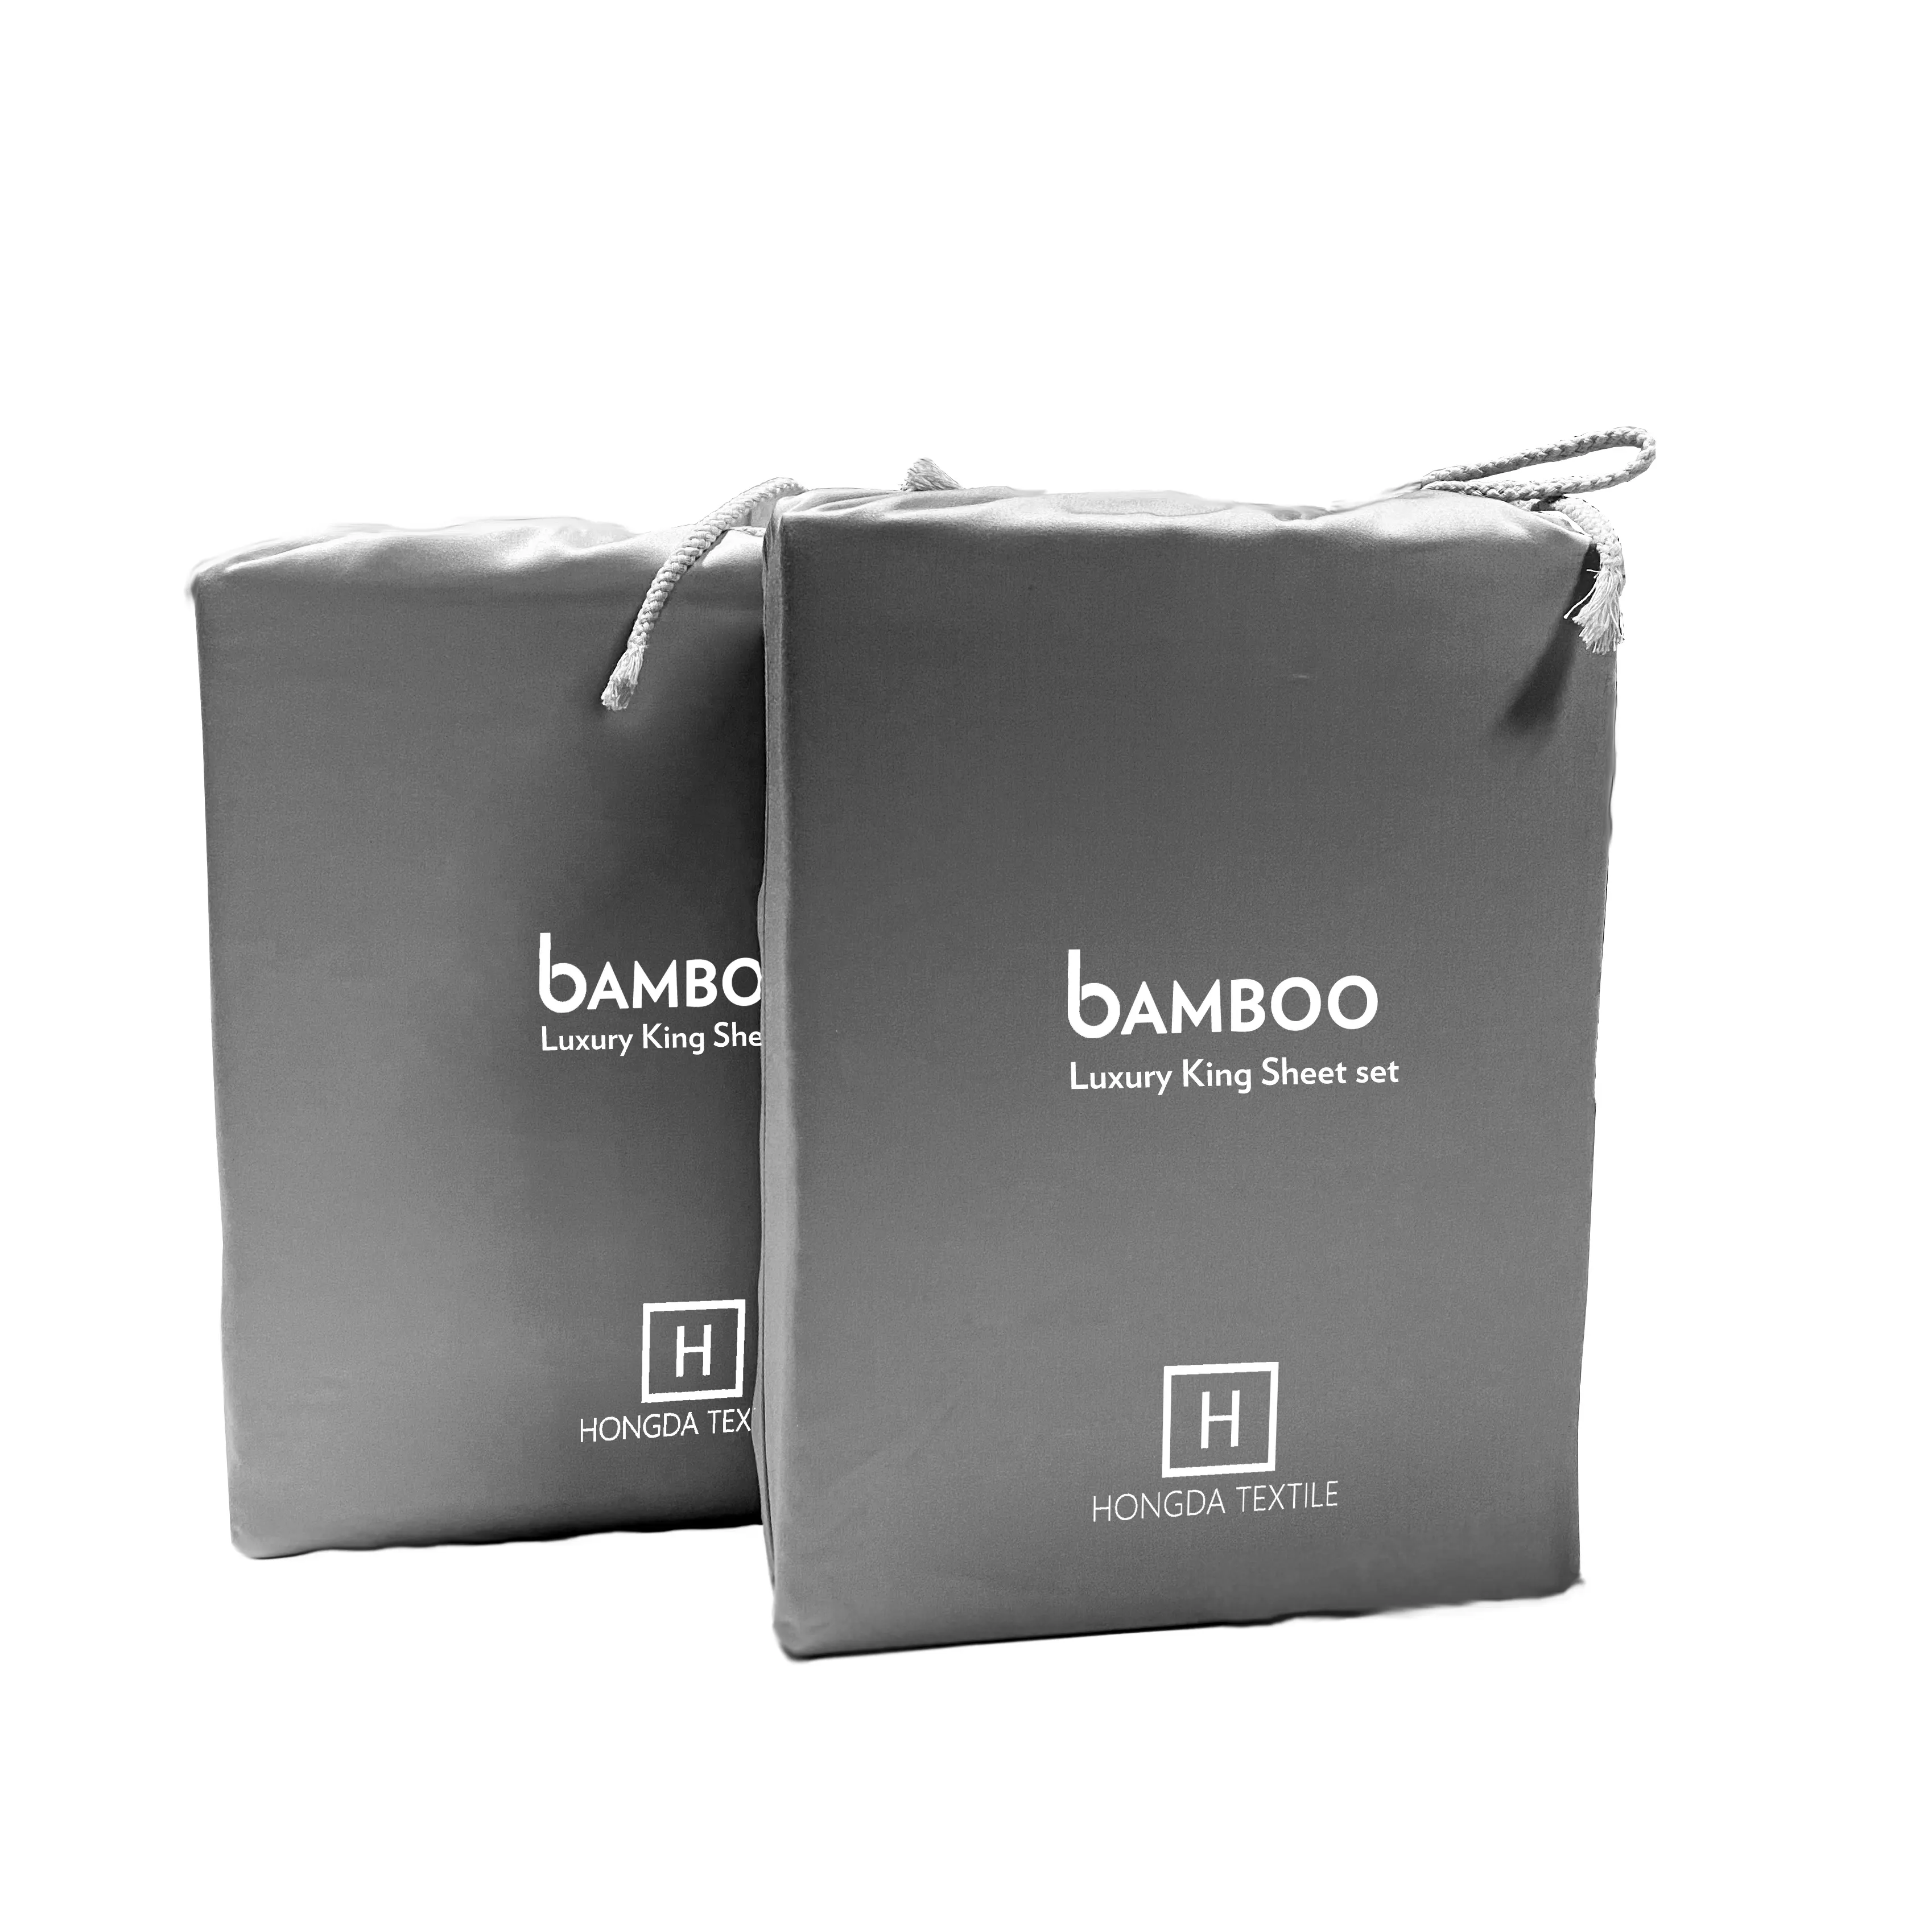 Bamboo Sheet Luxurious Soft And Eco-friendly Premium 400TC Bamboo Bed Sheet 100% Organic Bamboo Sheets